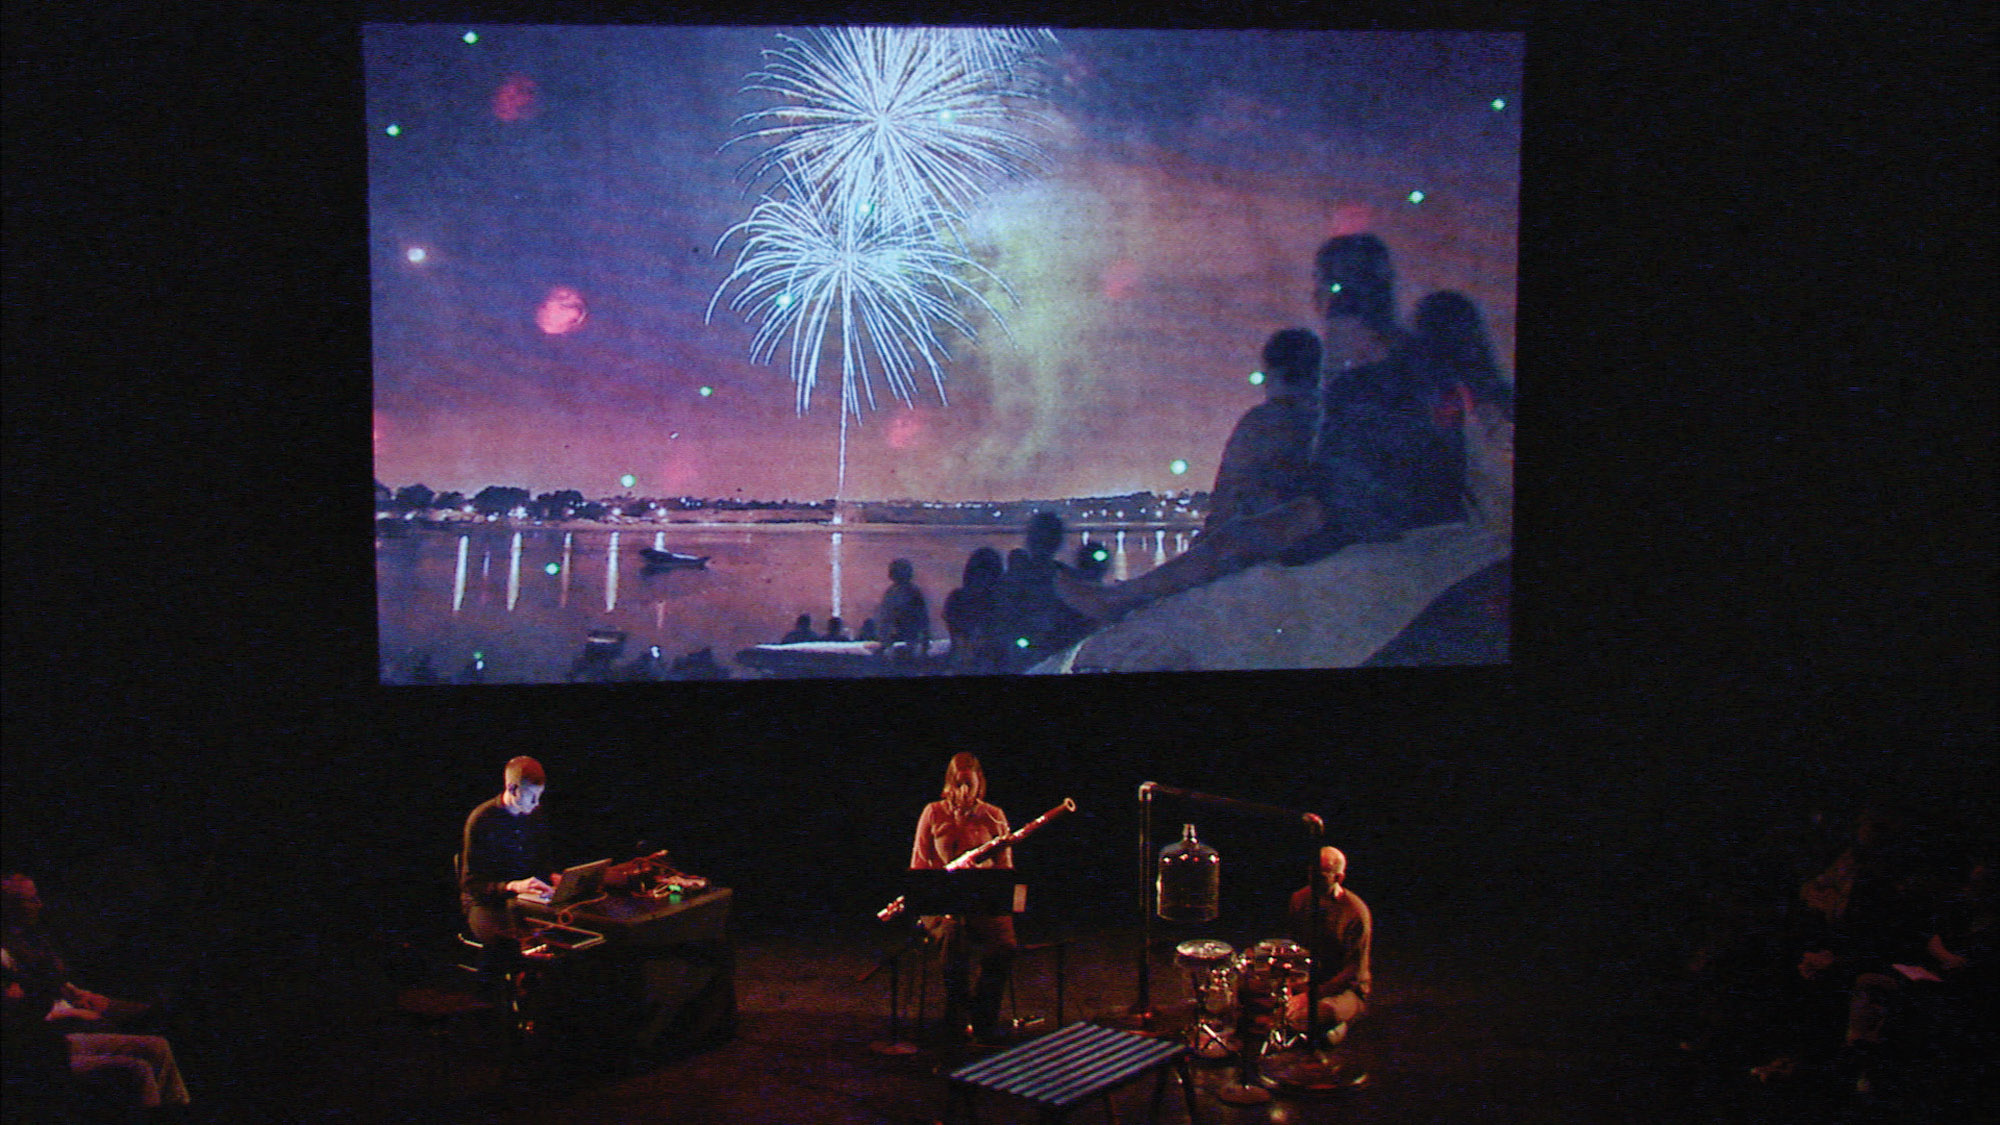 A group of three musicians playing on a dark stage lit by a projection of fireworks on a screen behind them. 